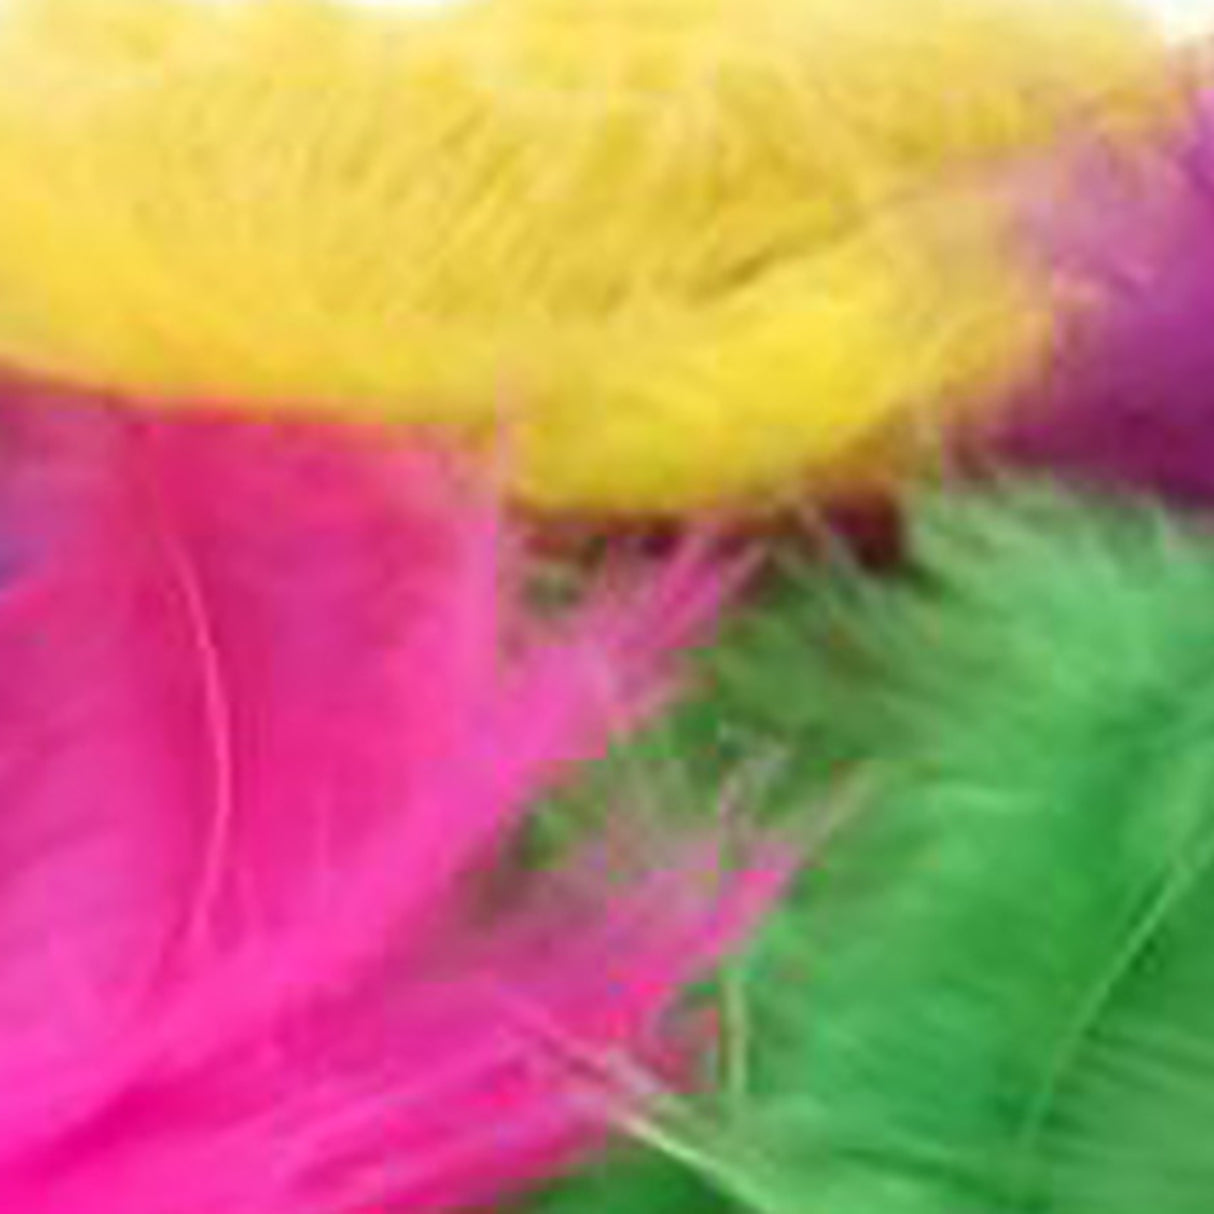 Colorific Feathers Small (Approx. 50 per bag)